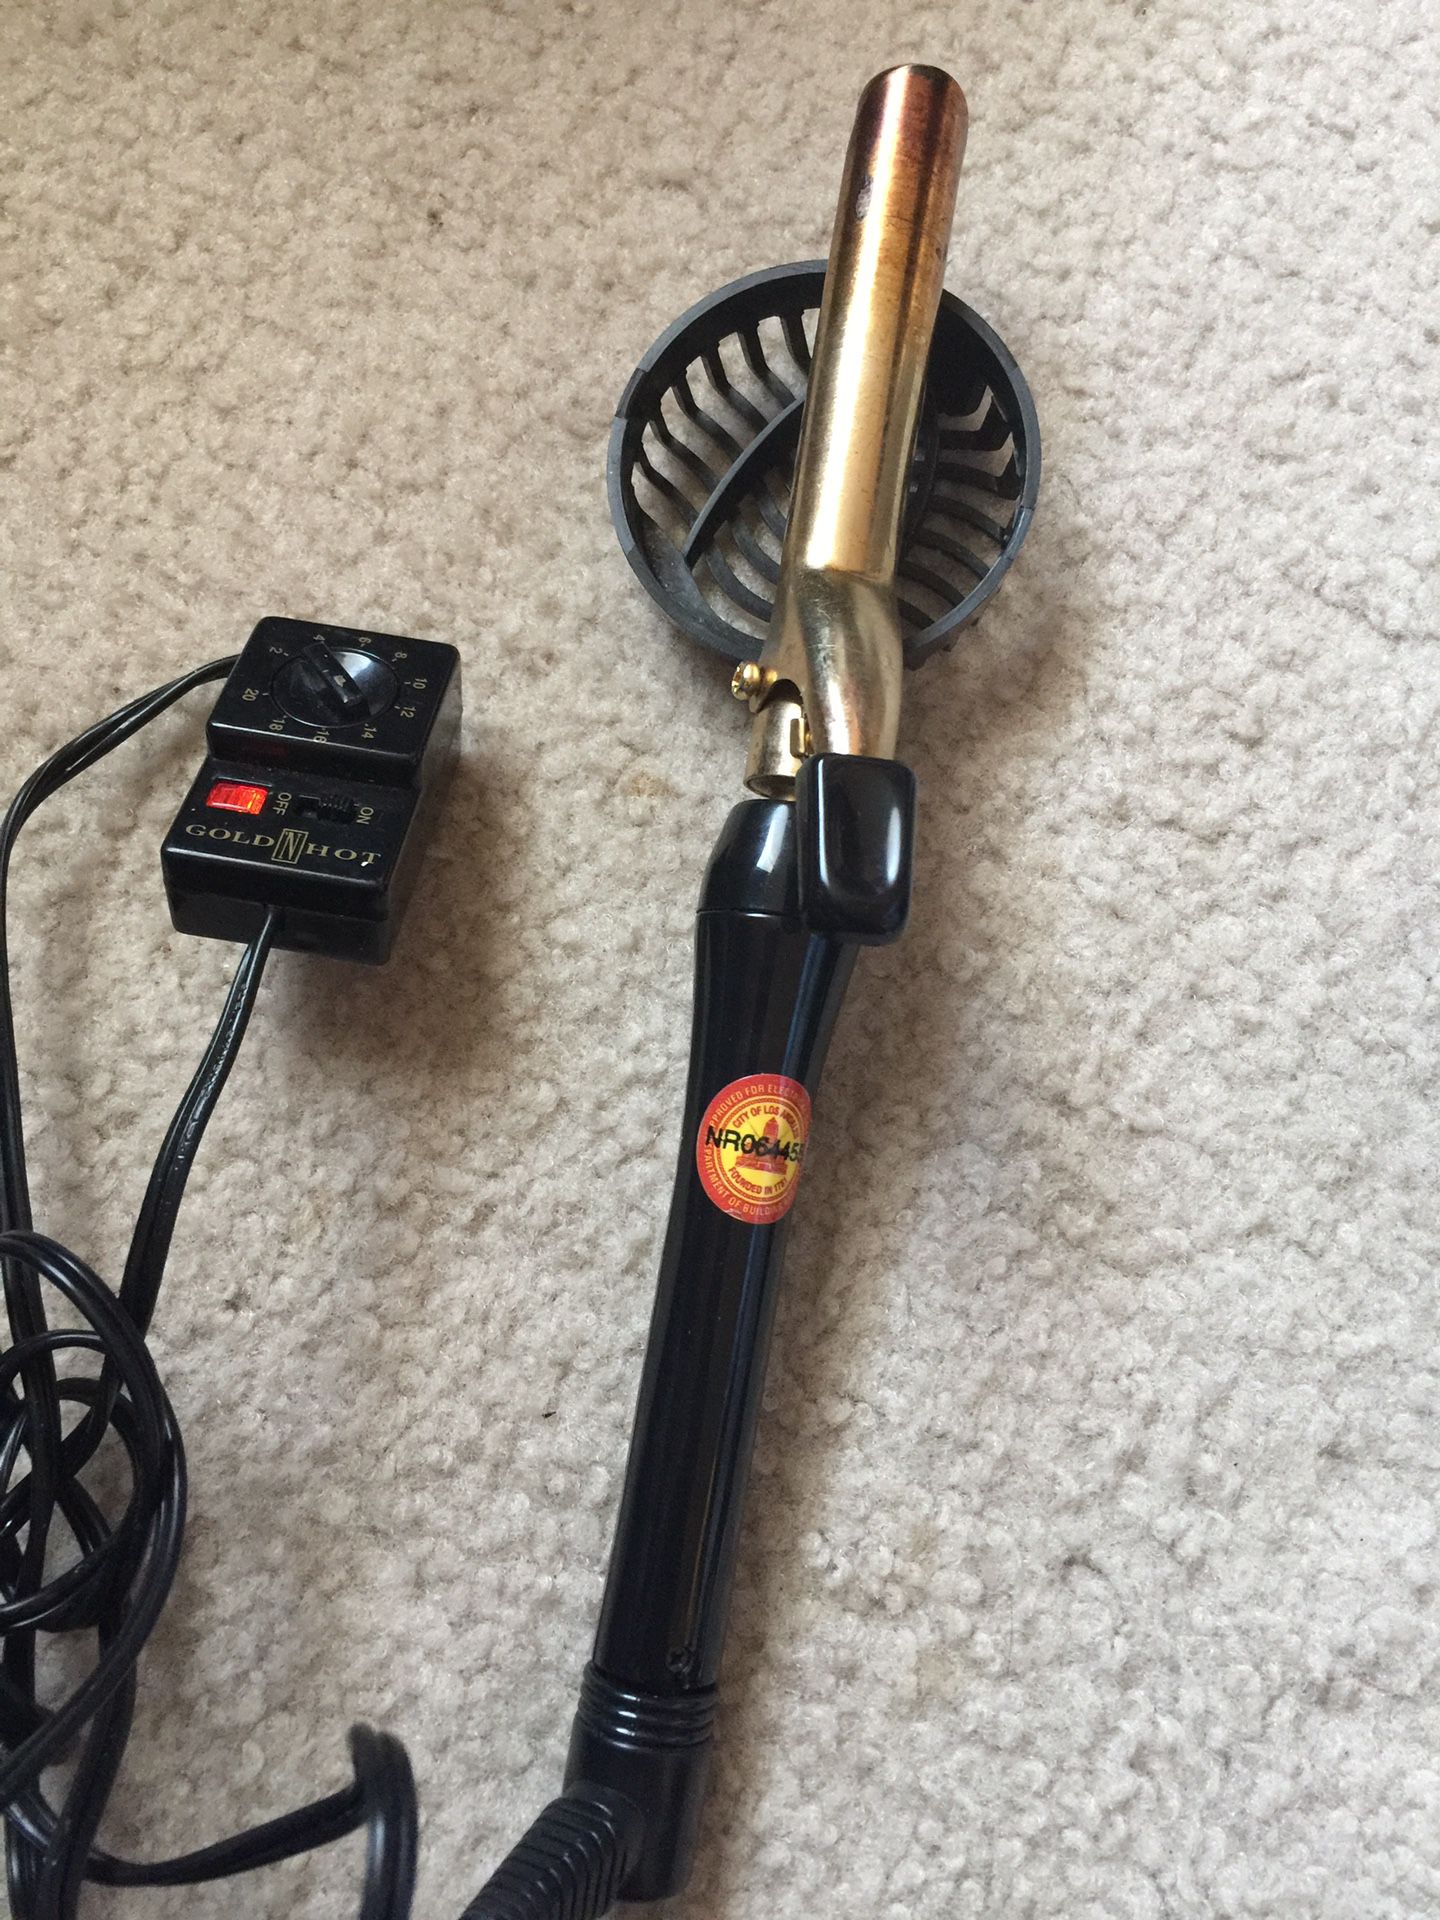 Gold N Hot curling hair straightening iron Used works perfect